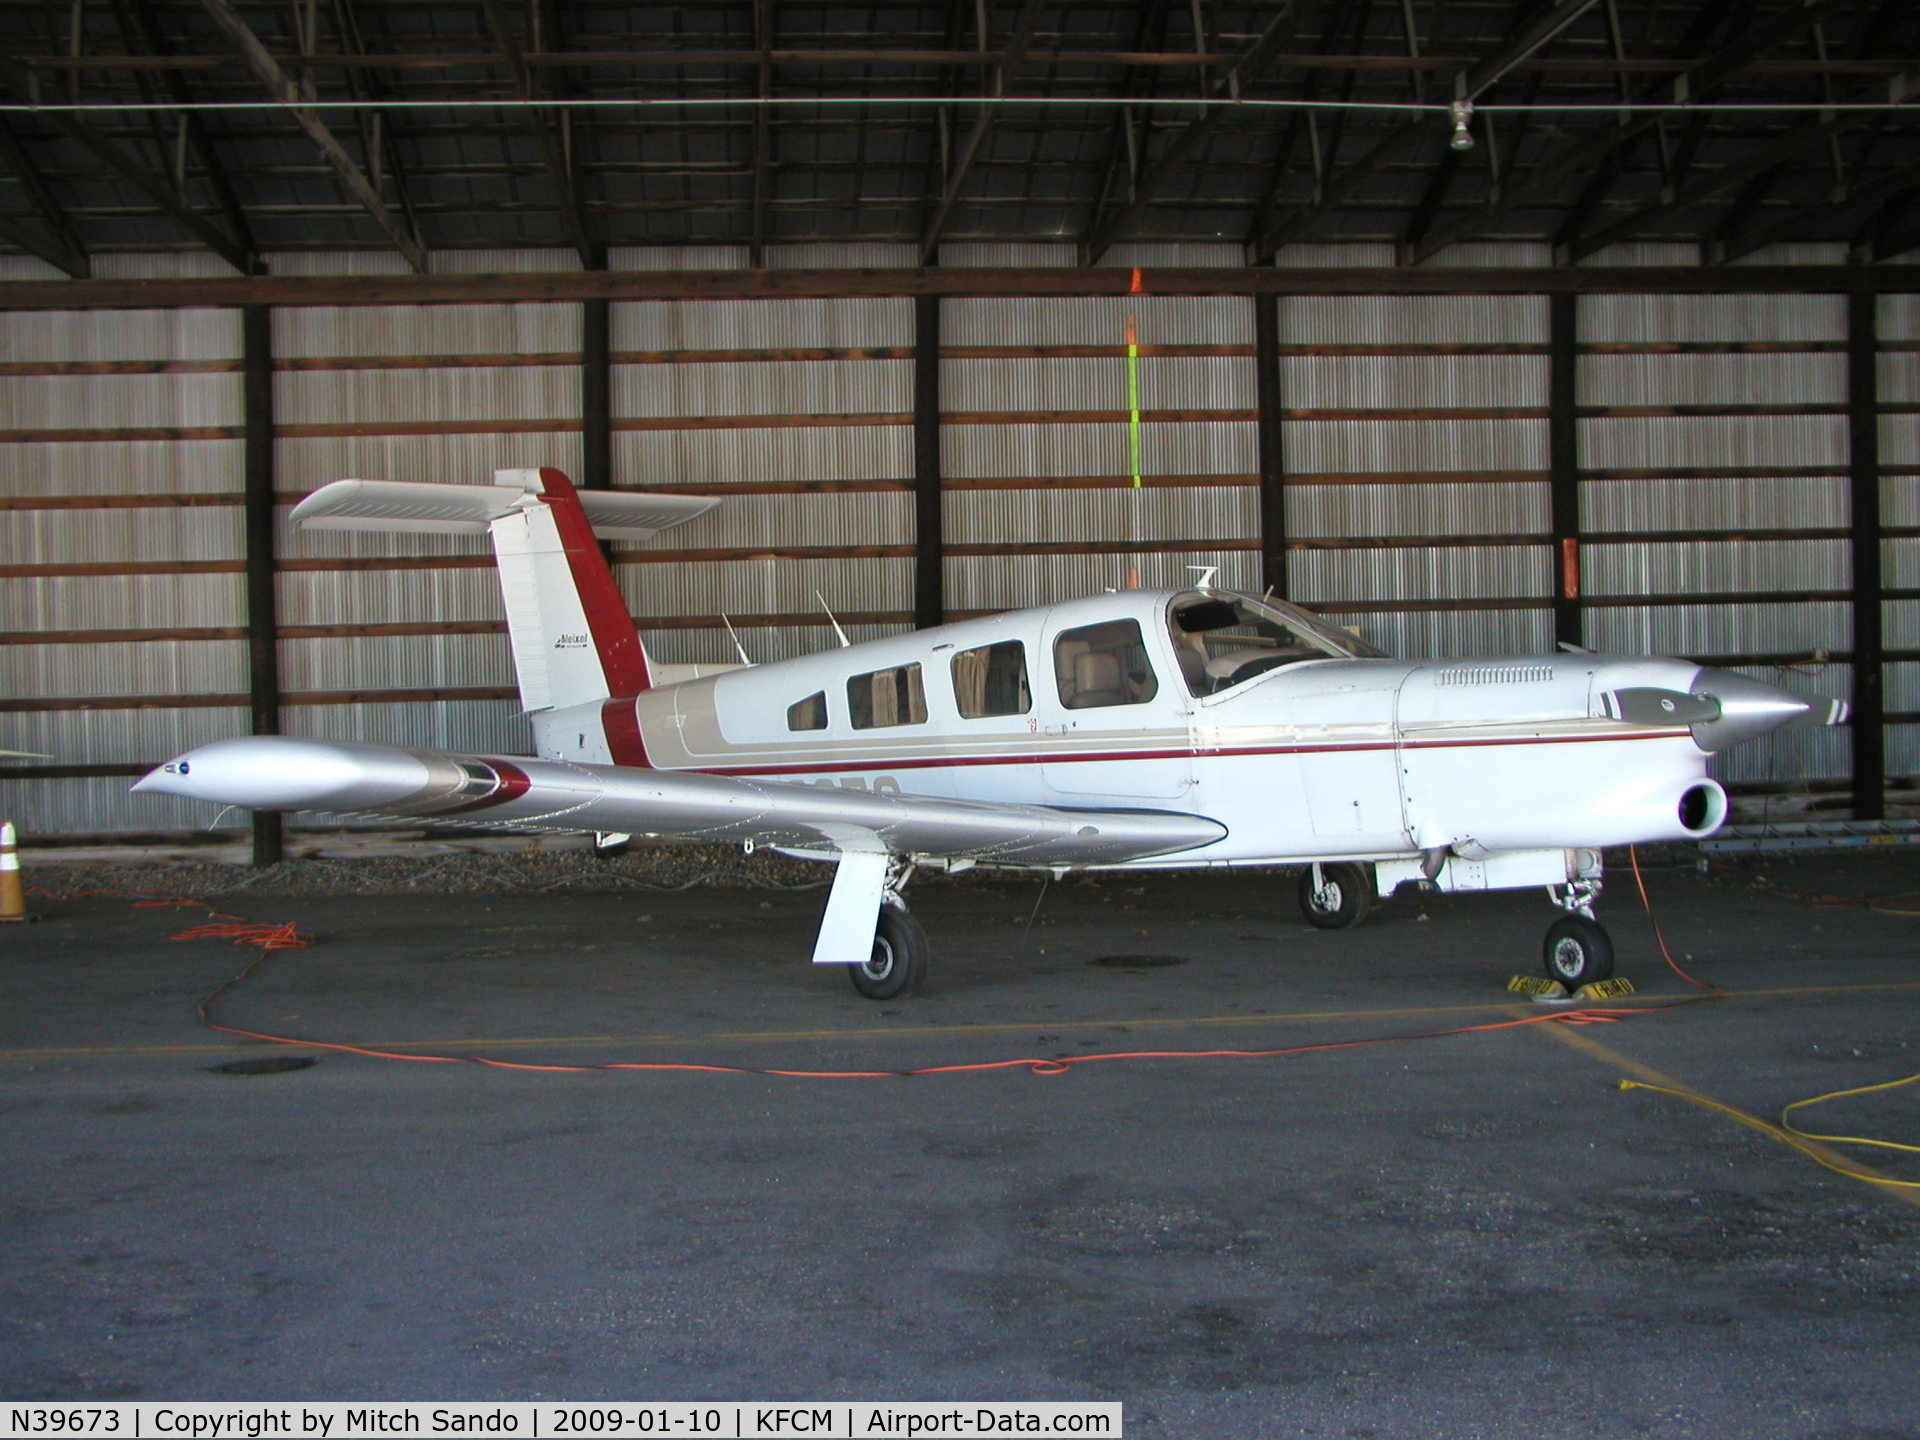 N39673, 1978 Piper PA-32RT-300T Turbo Lance II C/N 32R-7887139, Parked inside the hangars at Thunderbird.